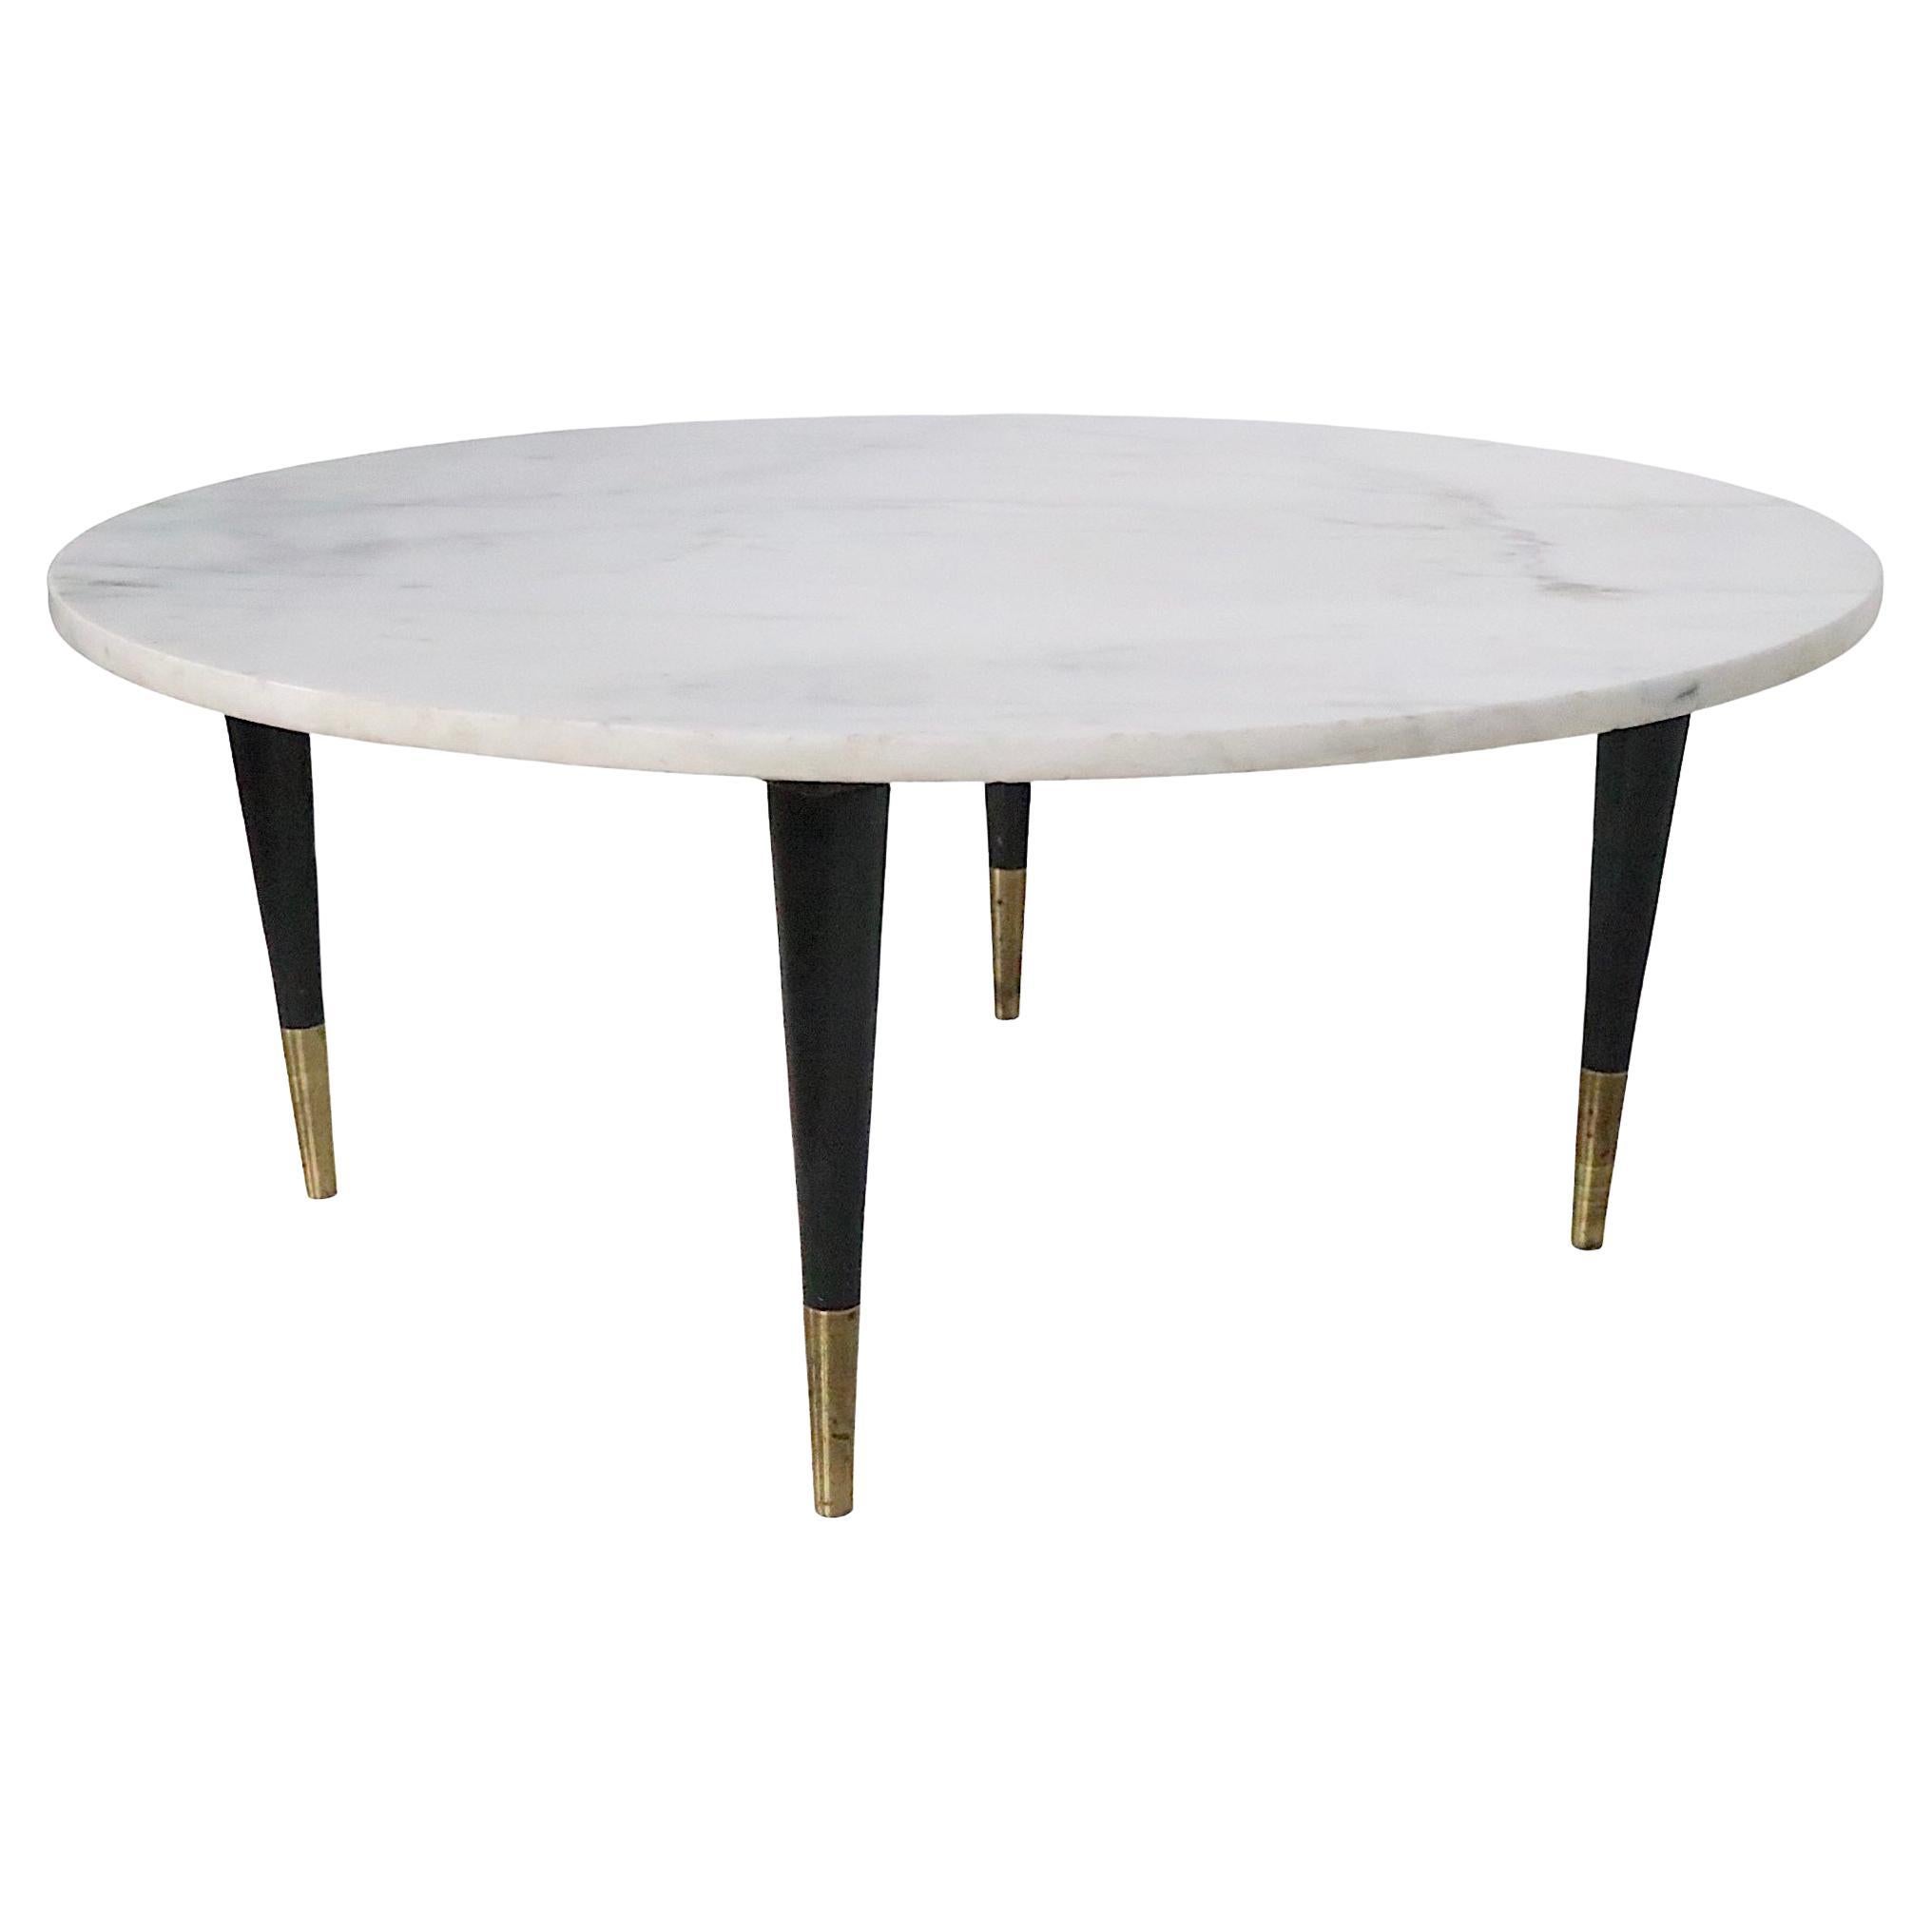 Black and White Mid Century Marble Top Coffee Cocktail Table, circa 1950/1960s For Sale